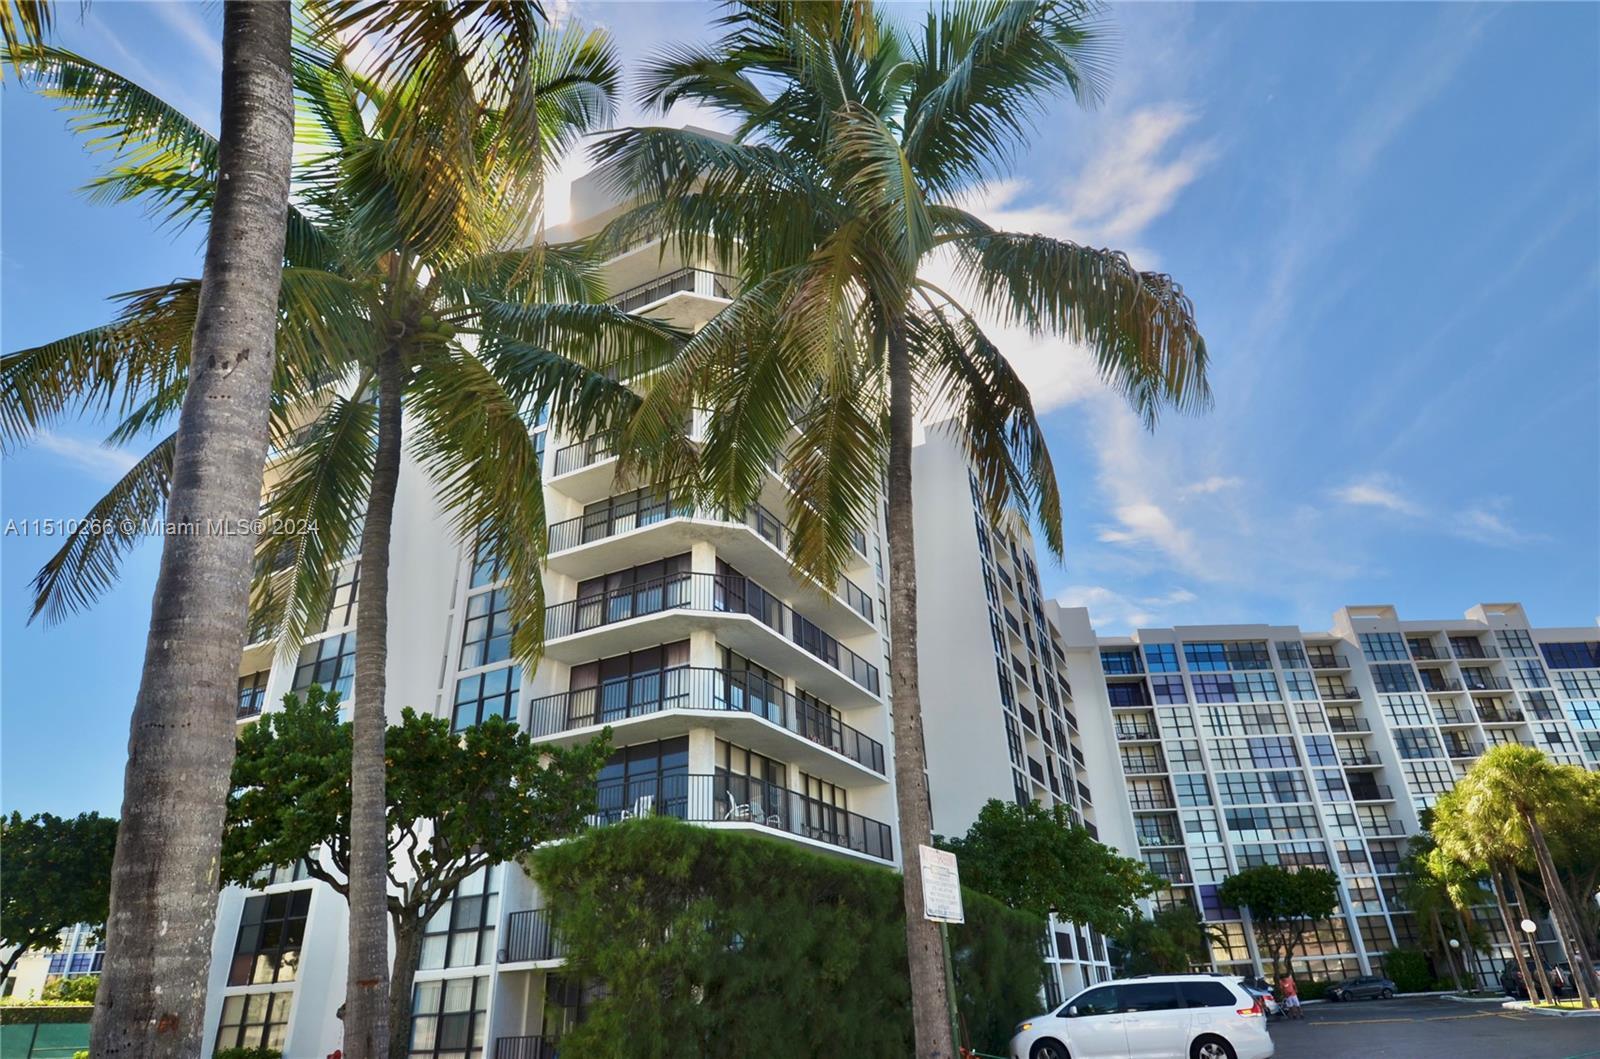 Photo of 1000 Parkview Dr #217 in Hallandale Beach, FL